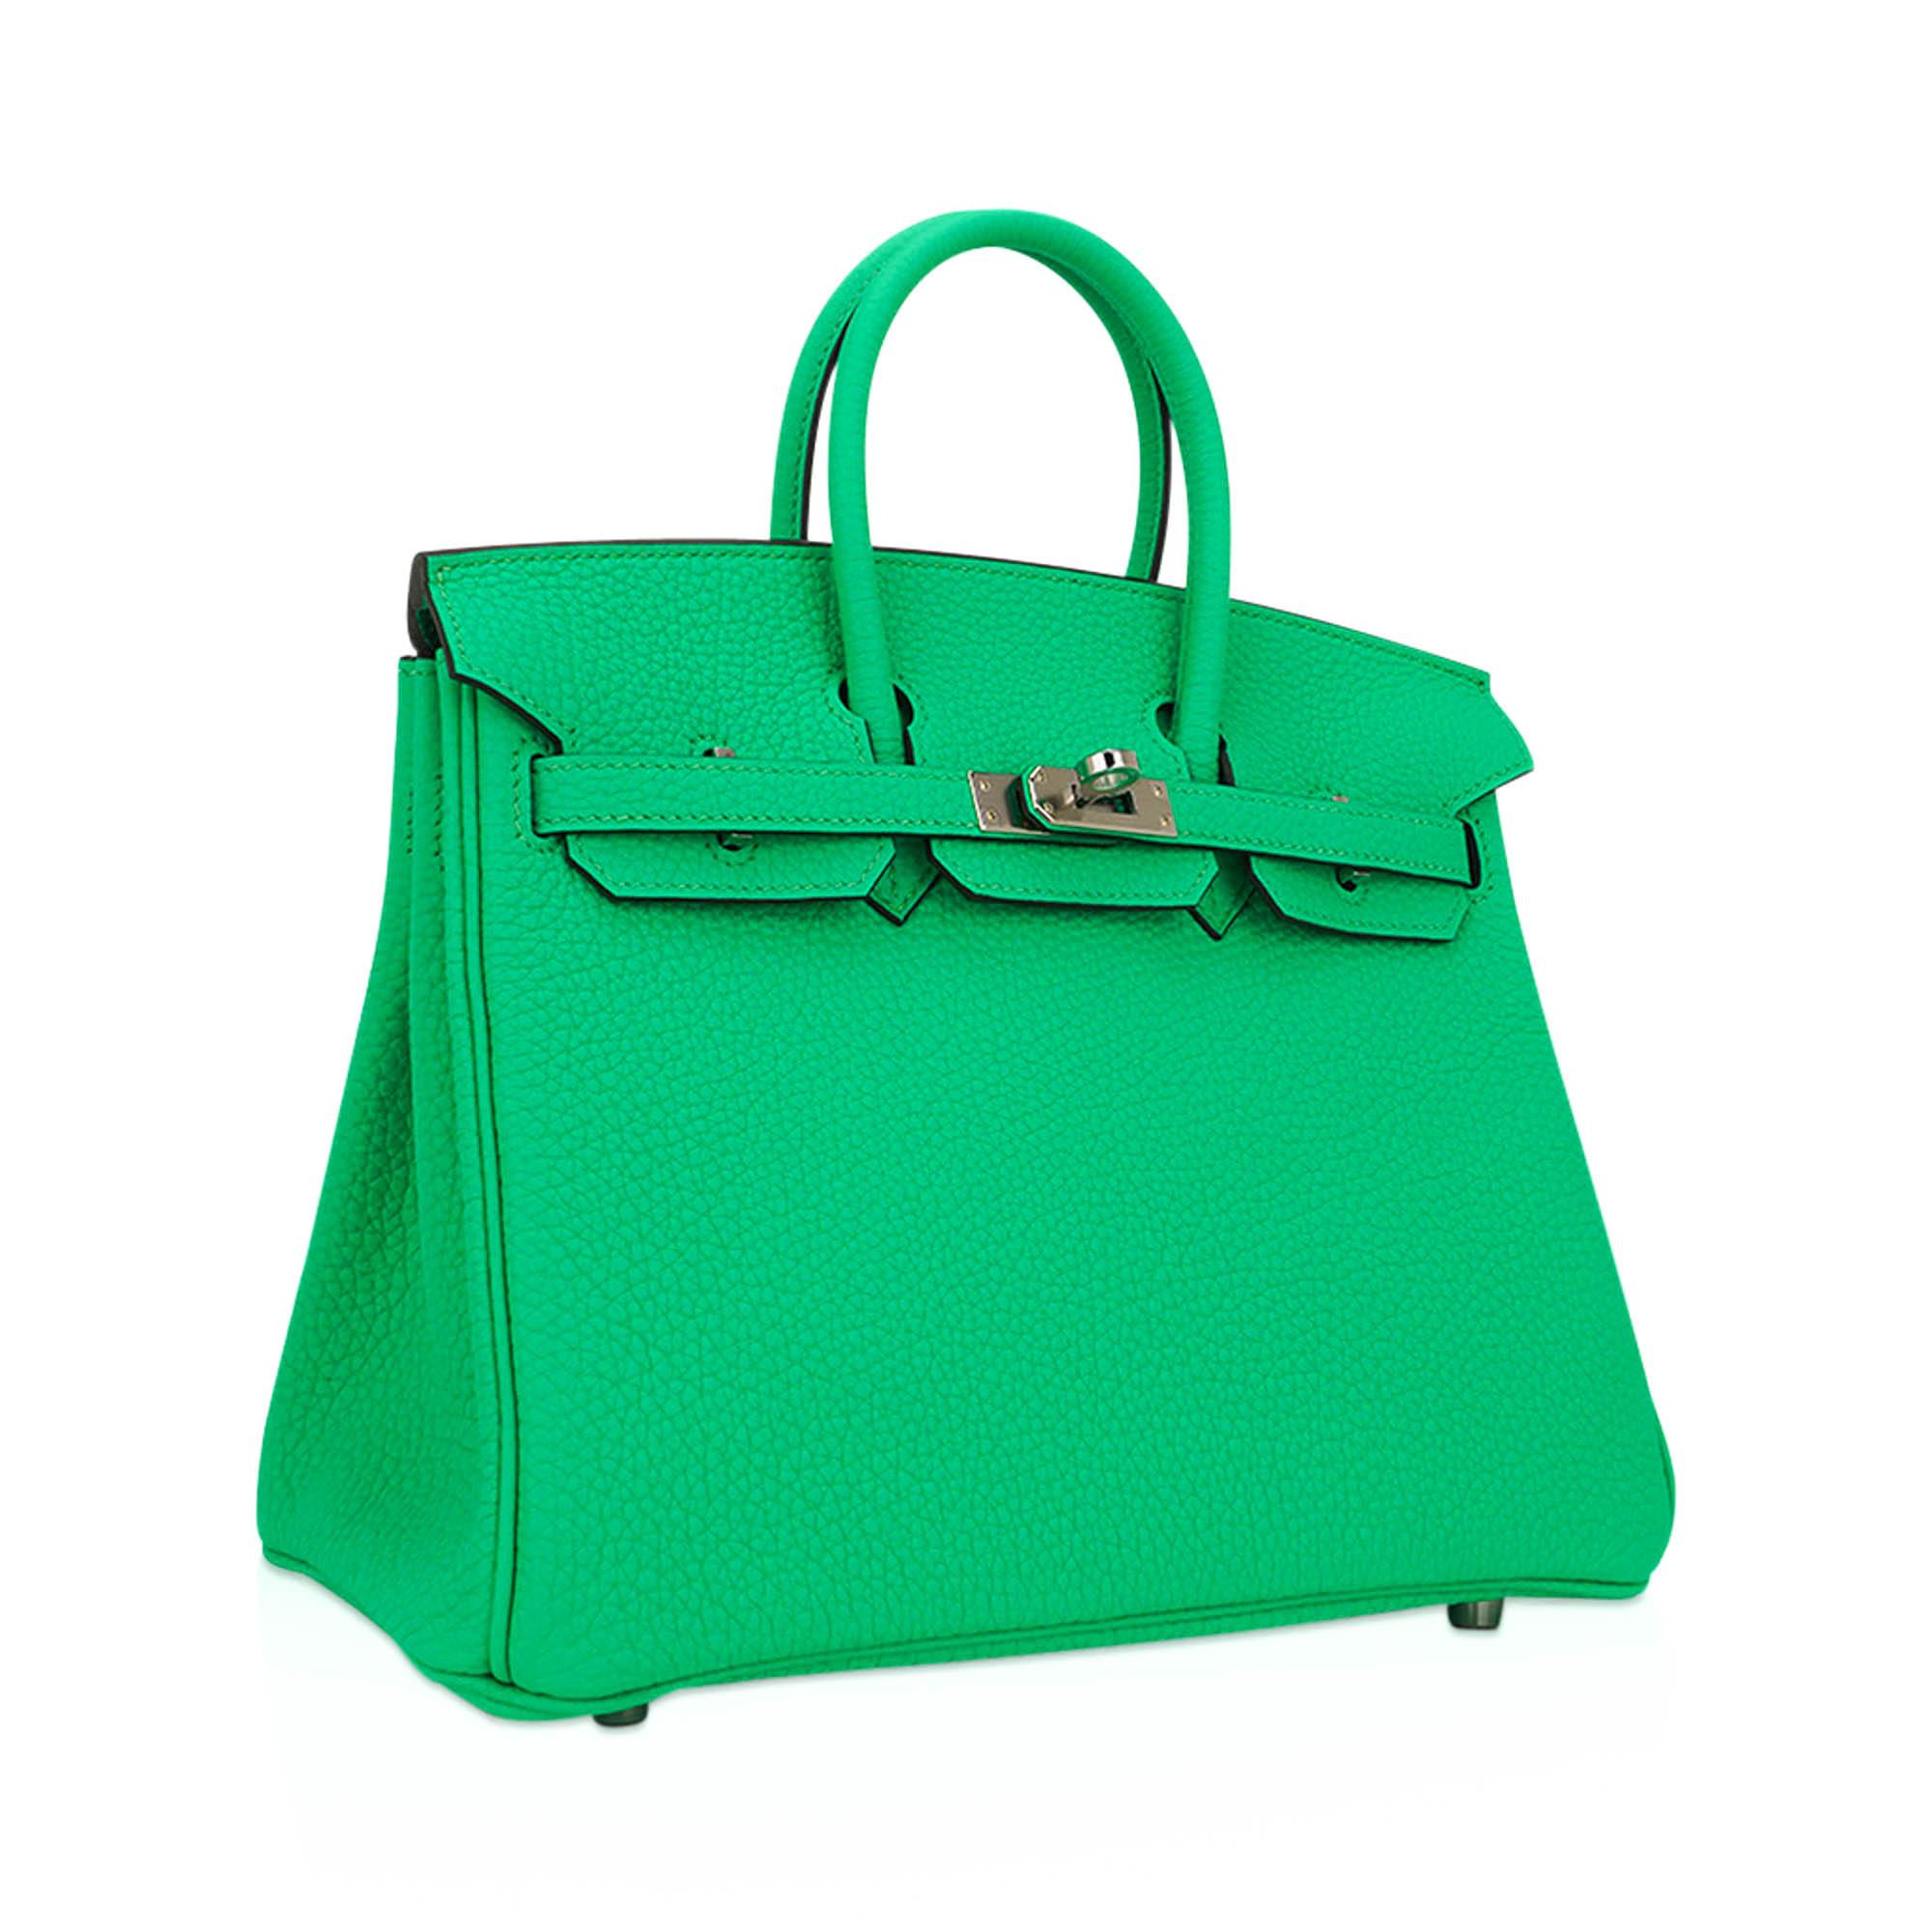 Mightychic offers an Hermes Birkin 25 bag featured in Vert Comics.
This vivid green bring you images of pop art comics and everything happy.
Clear and vibrant this pretty green will steal your heart!
Crisp with Palladium hardware.
Togo leather is